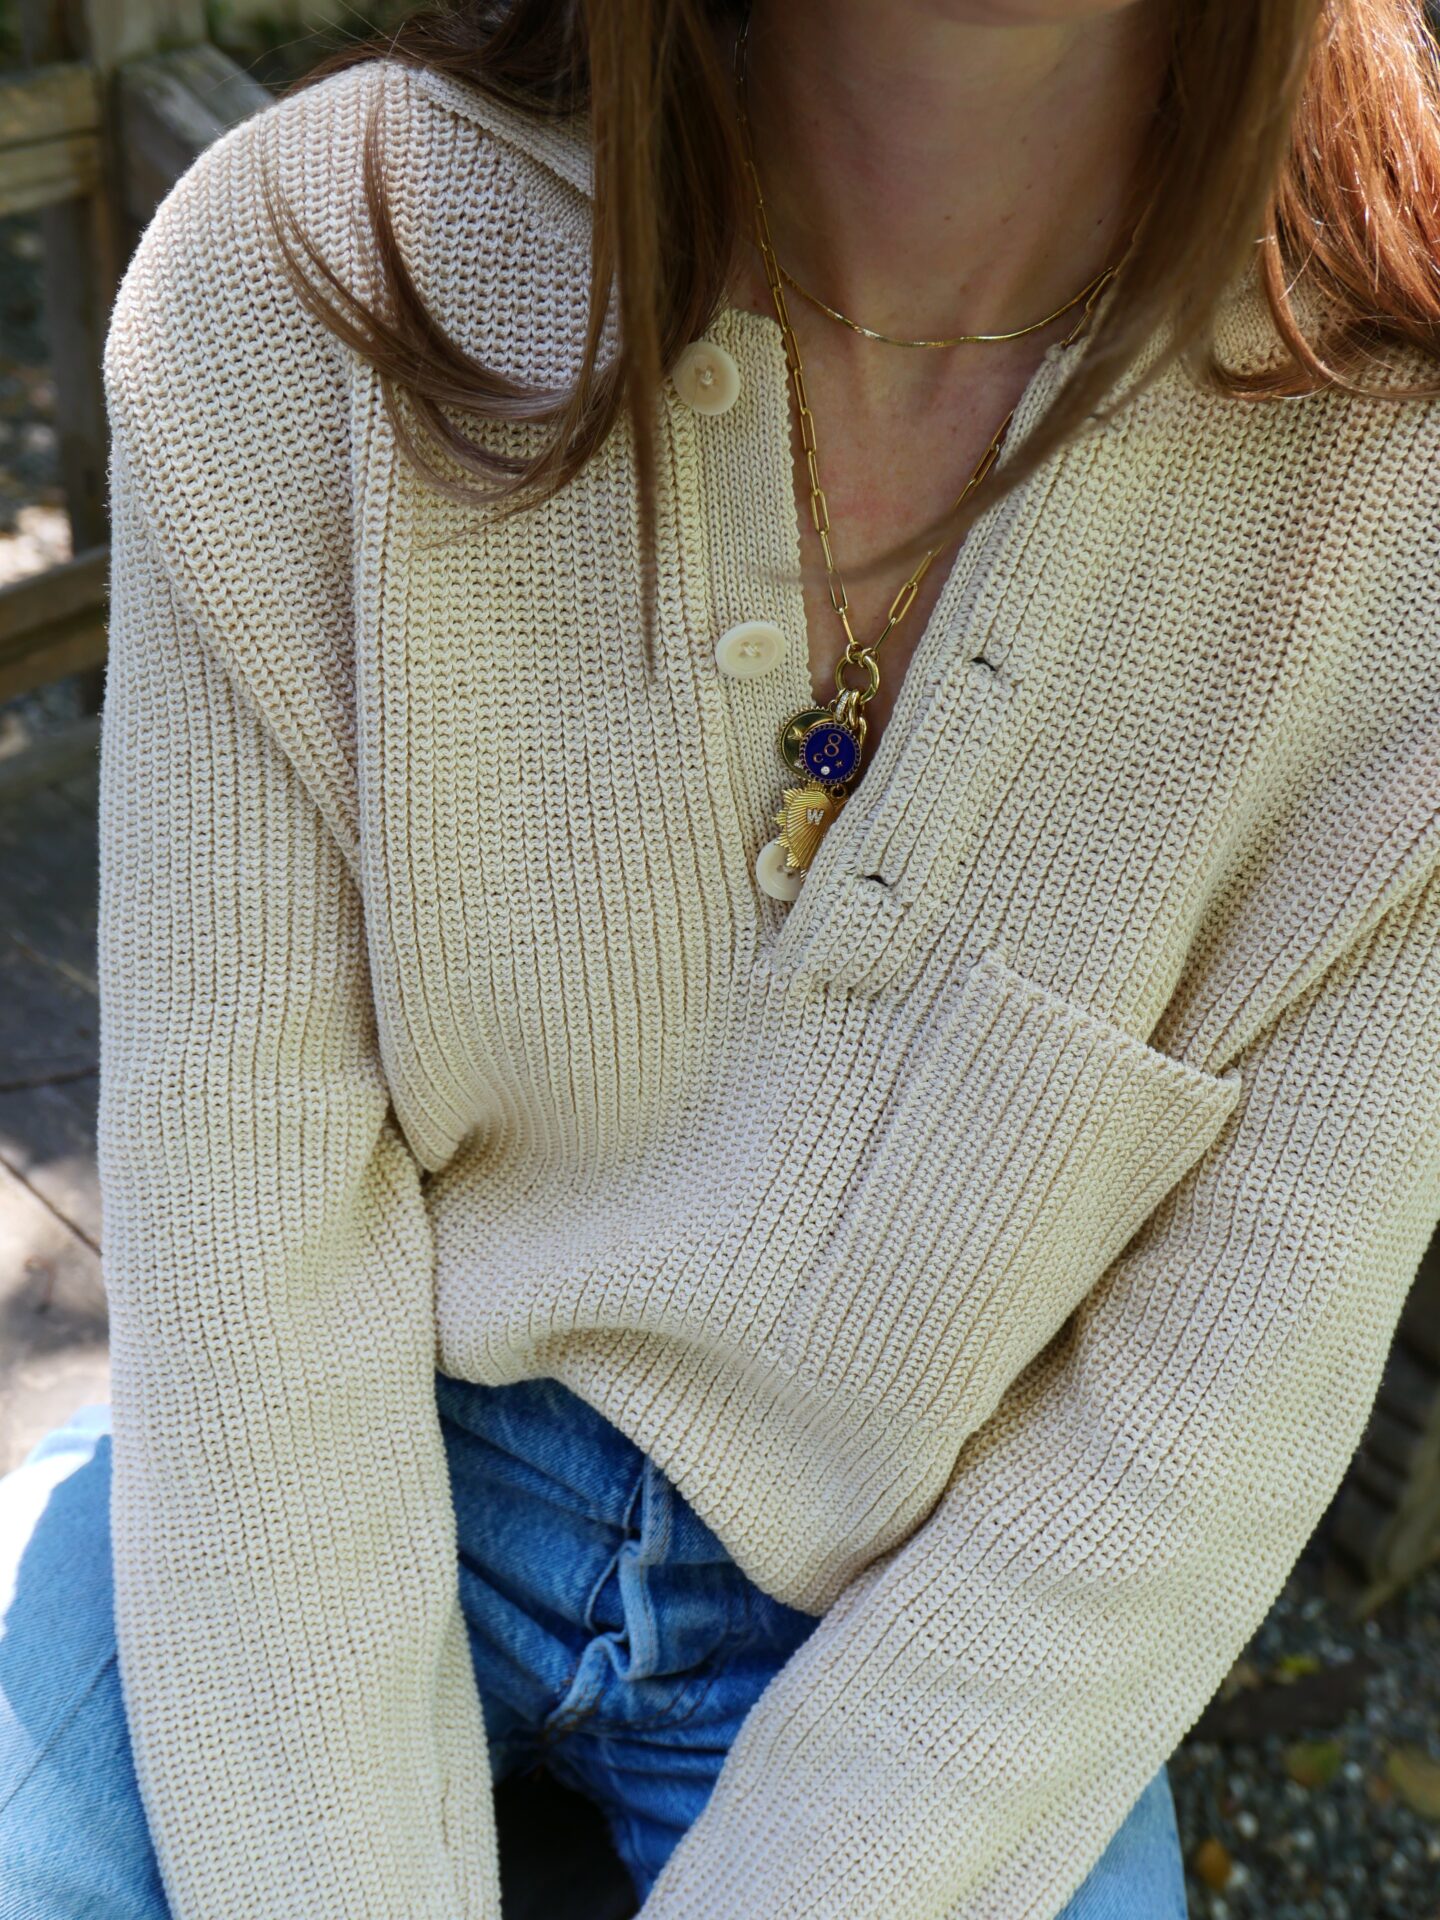 closer look of the Shaina Mote sweater